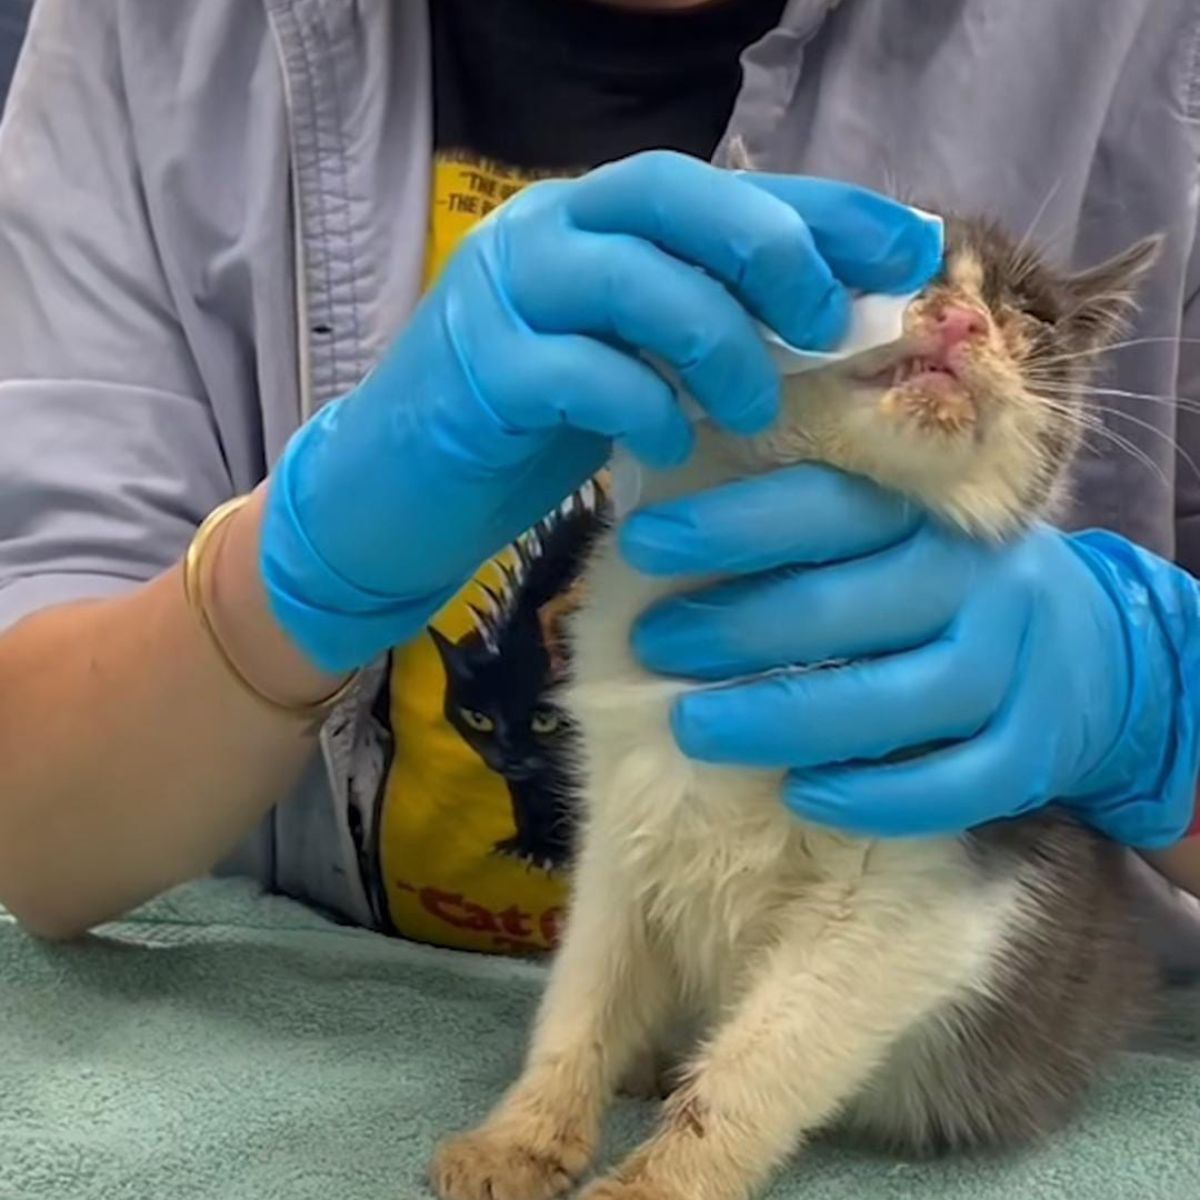 vet cleaning a cat